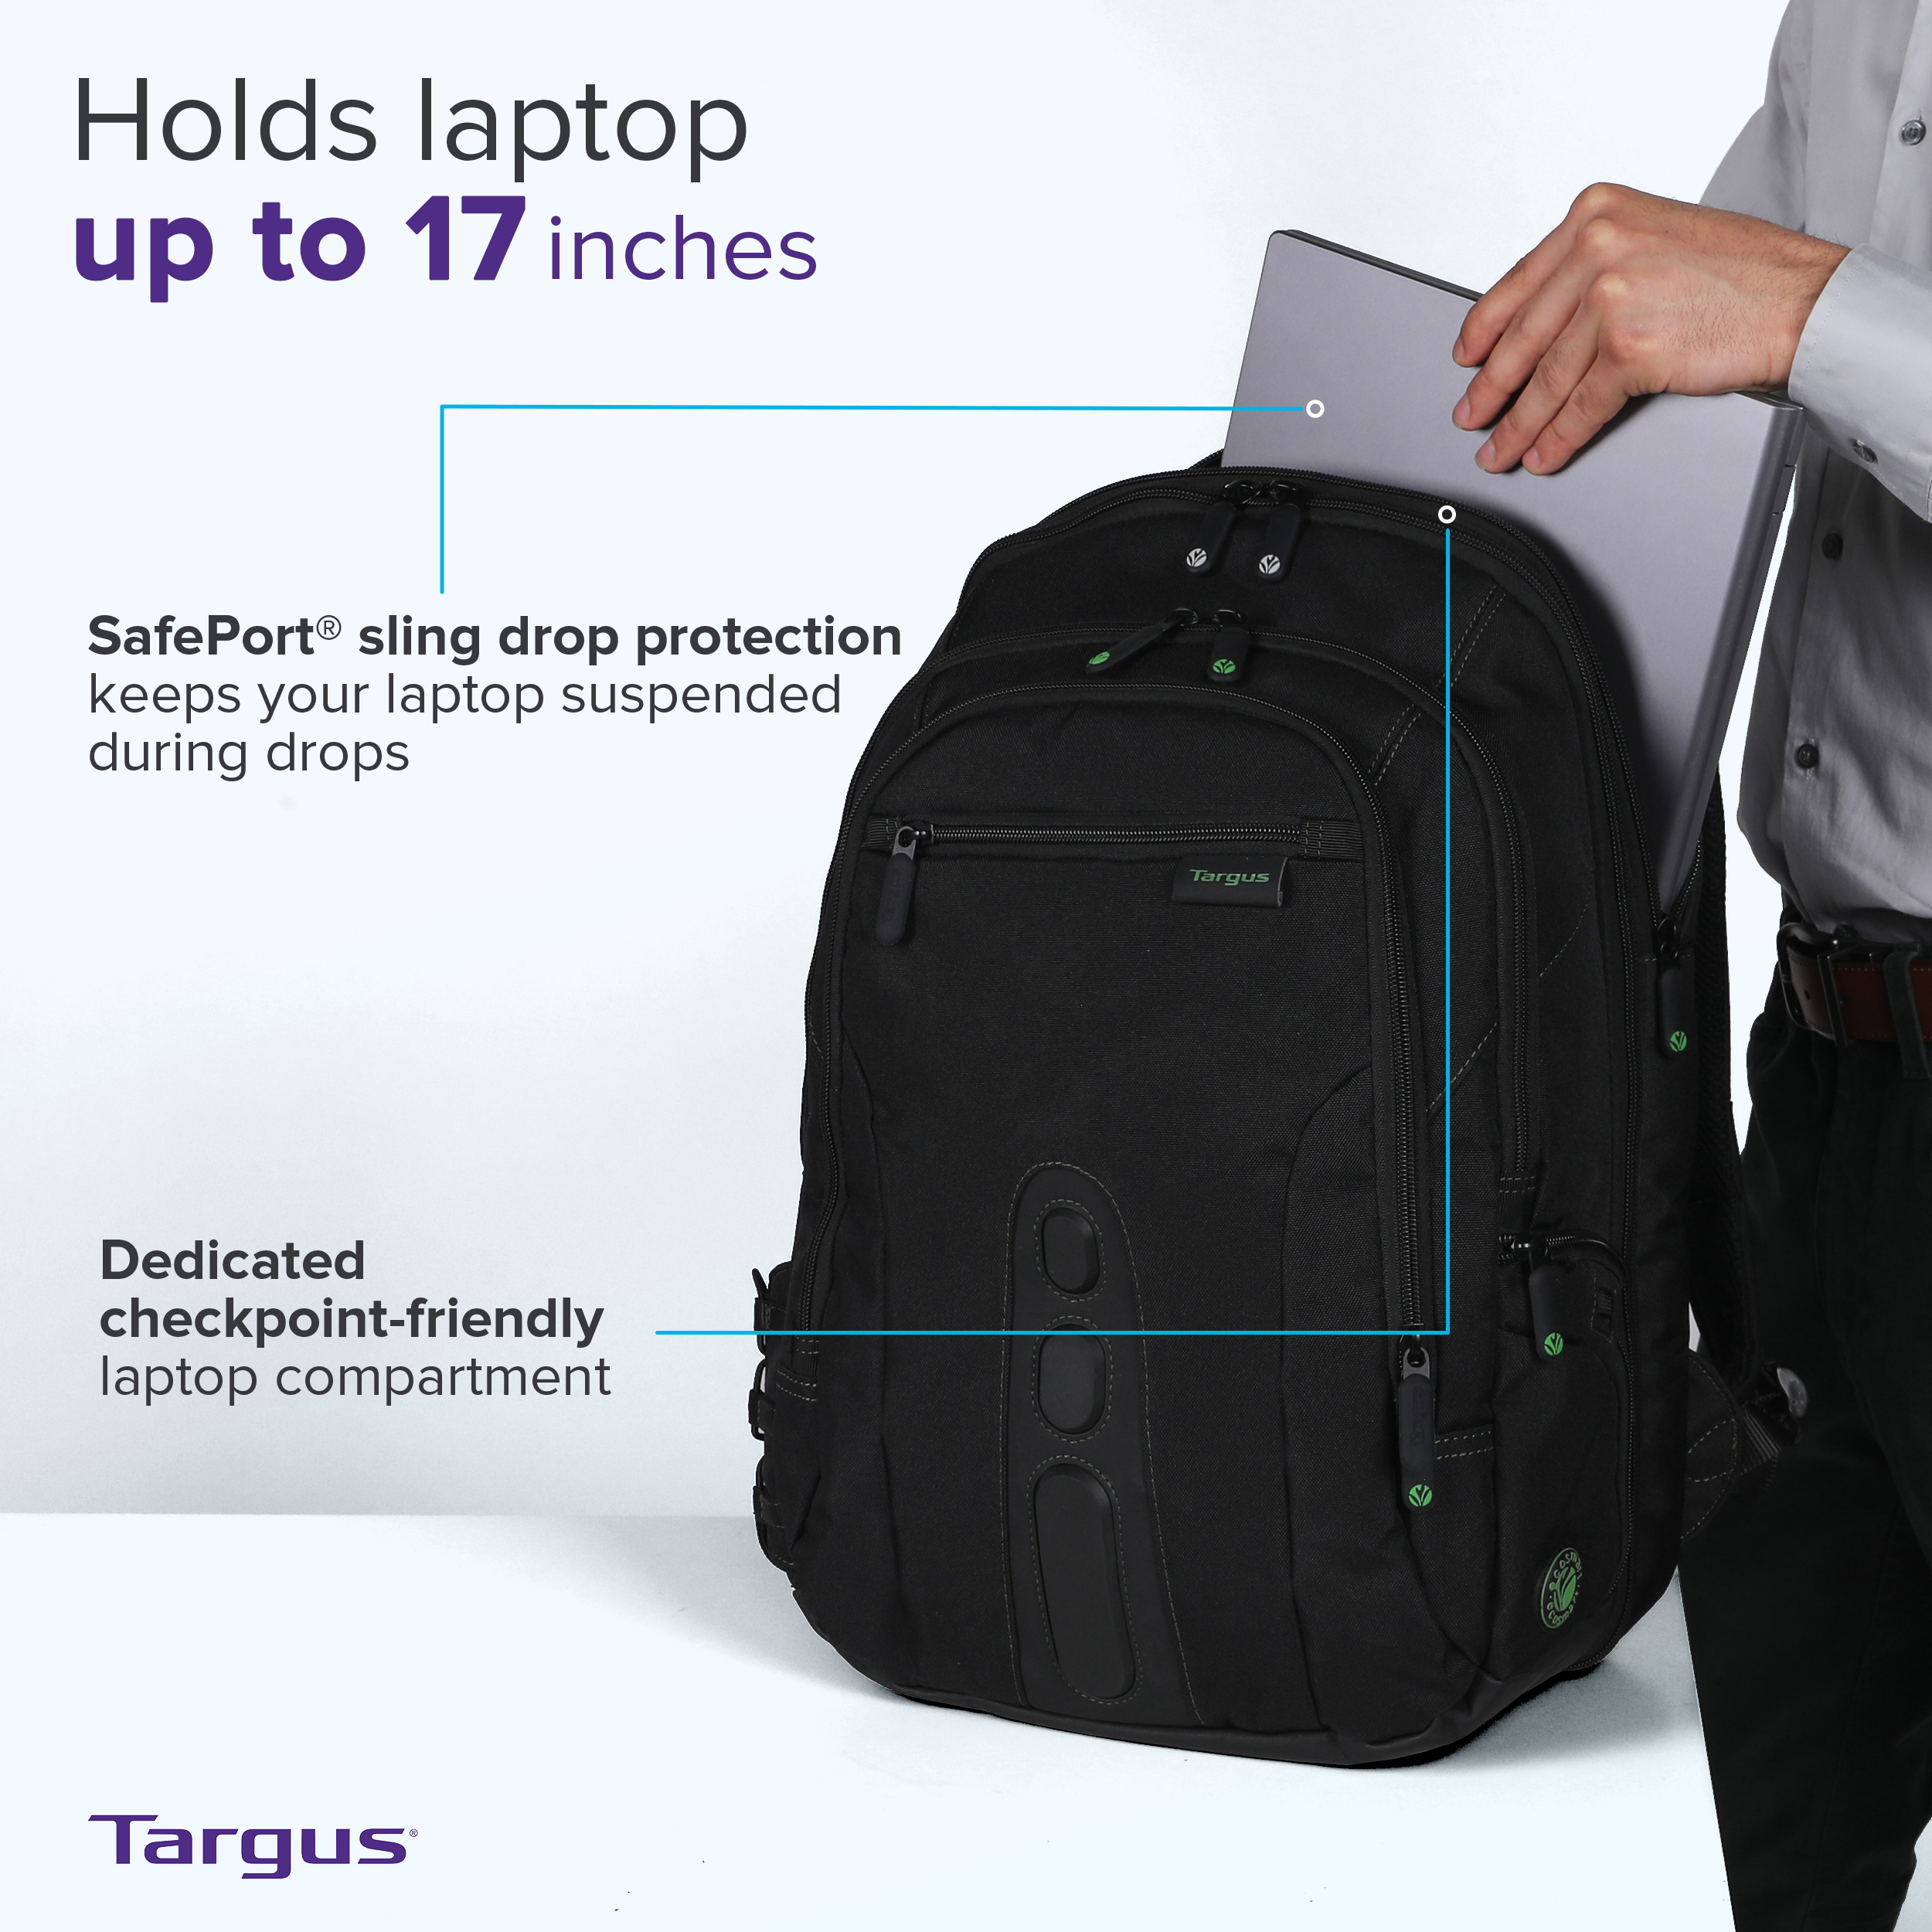 Targus EcoSmart TBB019US Carrying Case (Backpack) for 17" Notebook - Black, Green - image 5 of 9